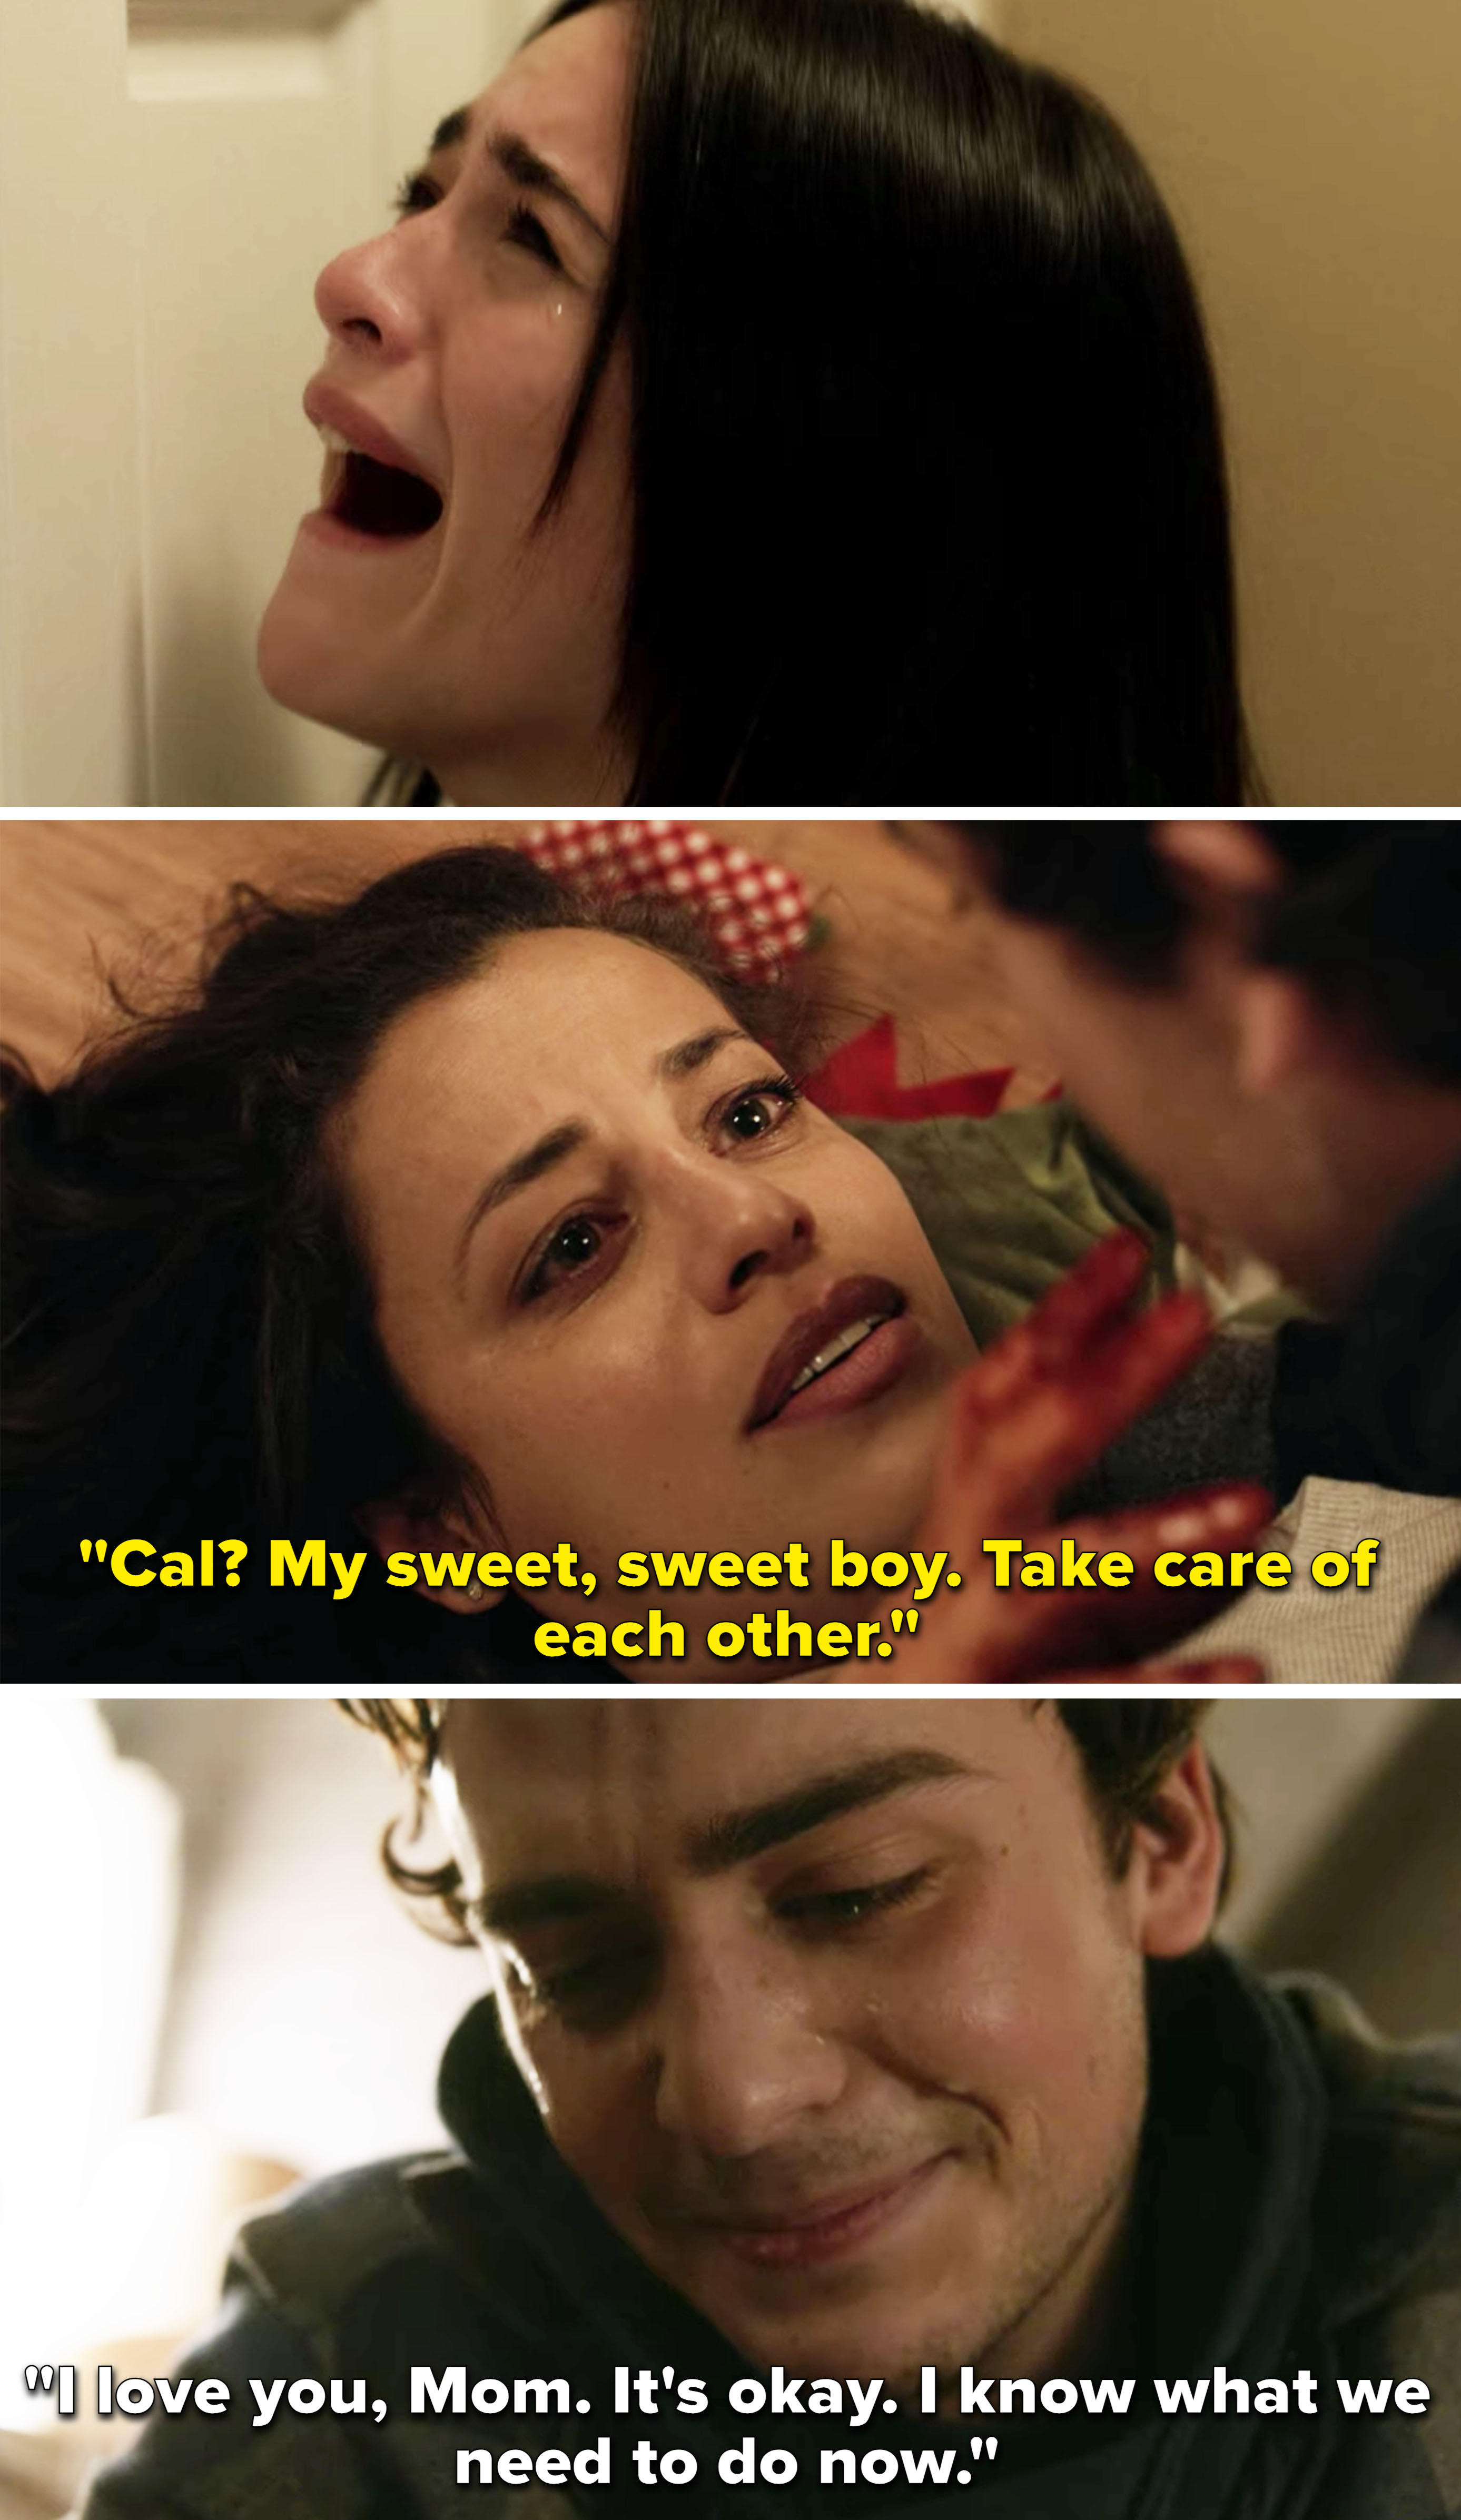 Grace telling an adult Cal to take care of everyone, and Cal saying he loves her